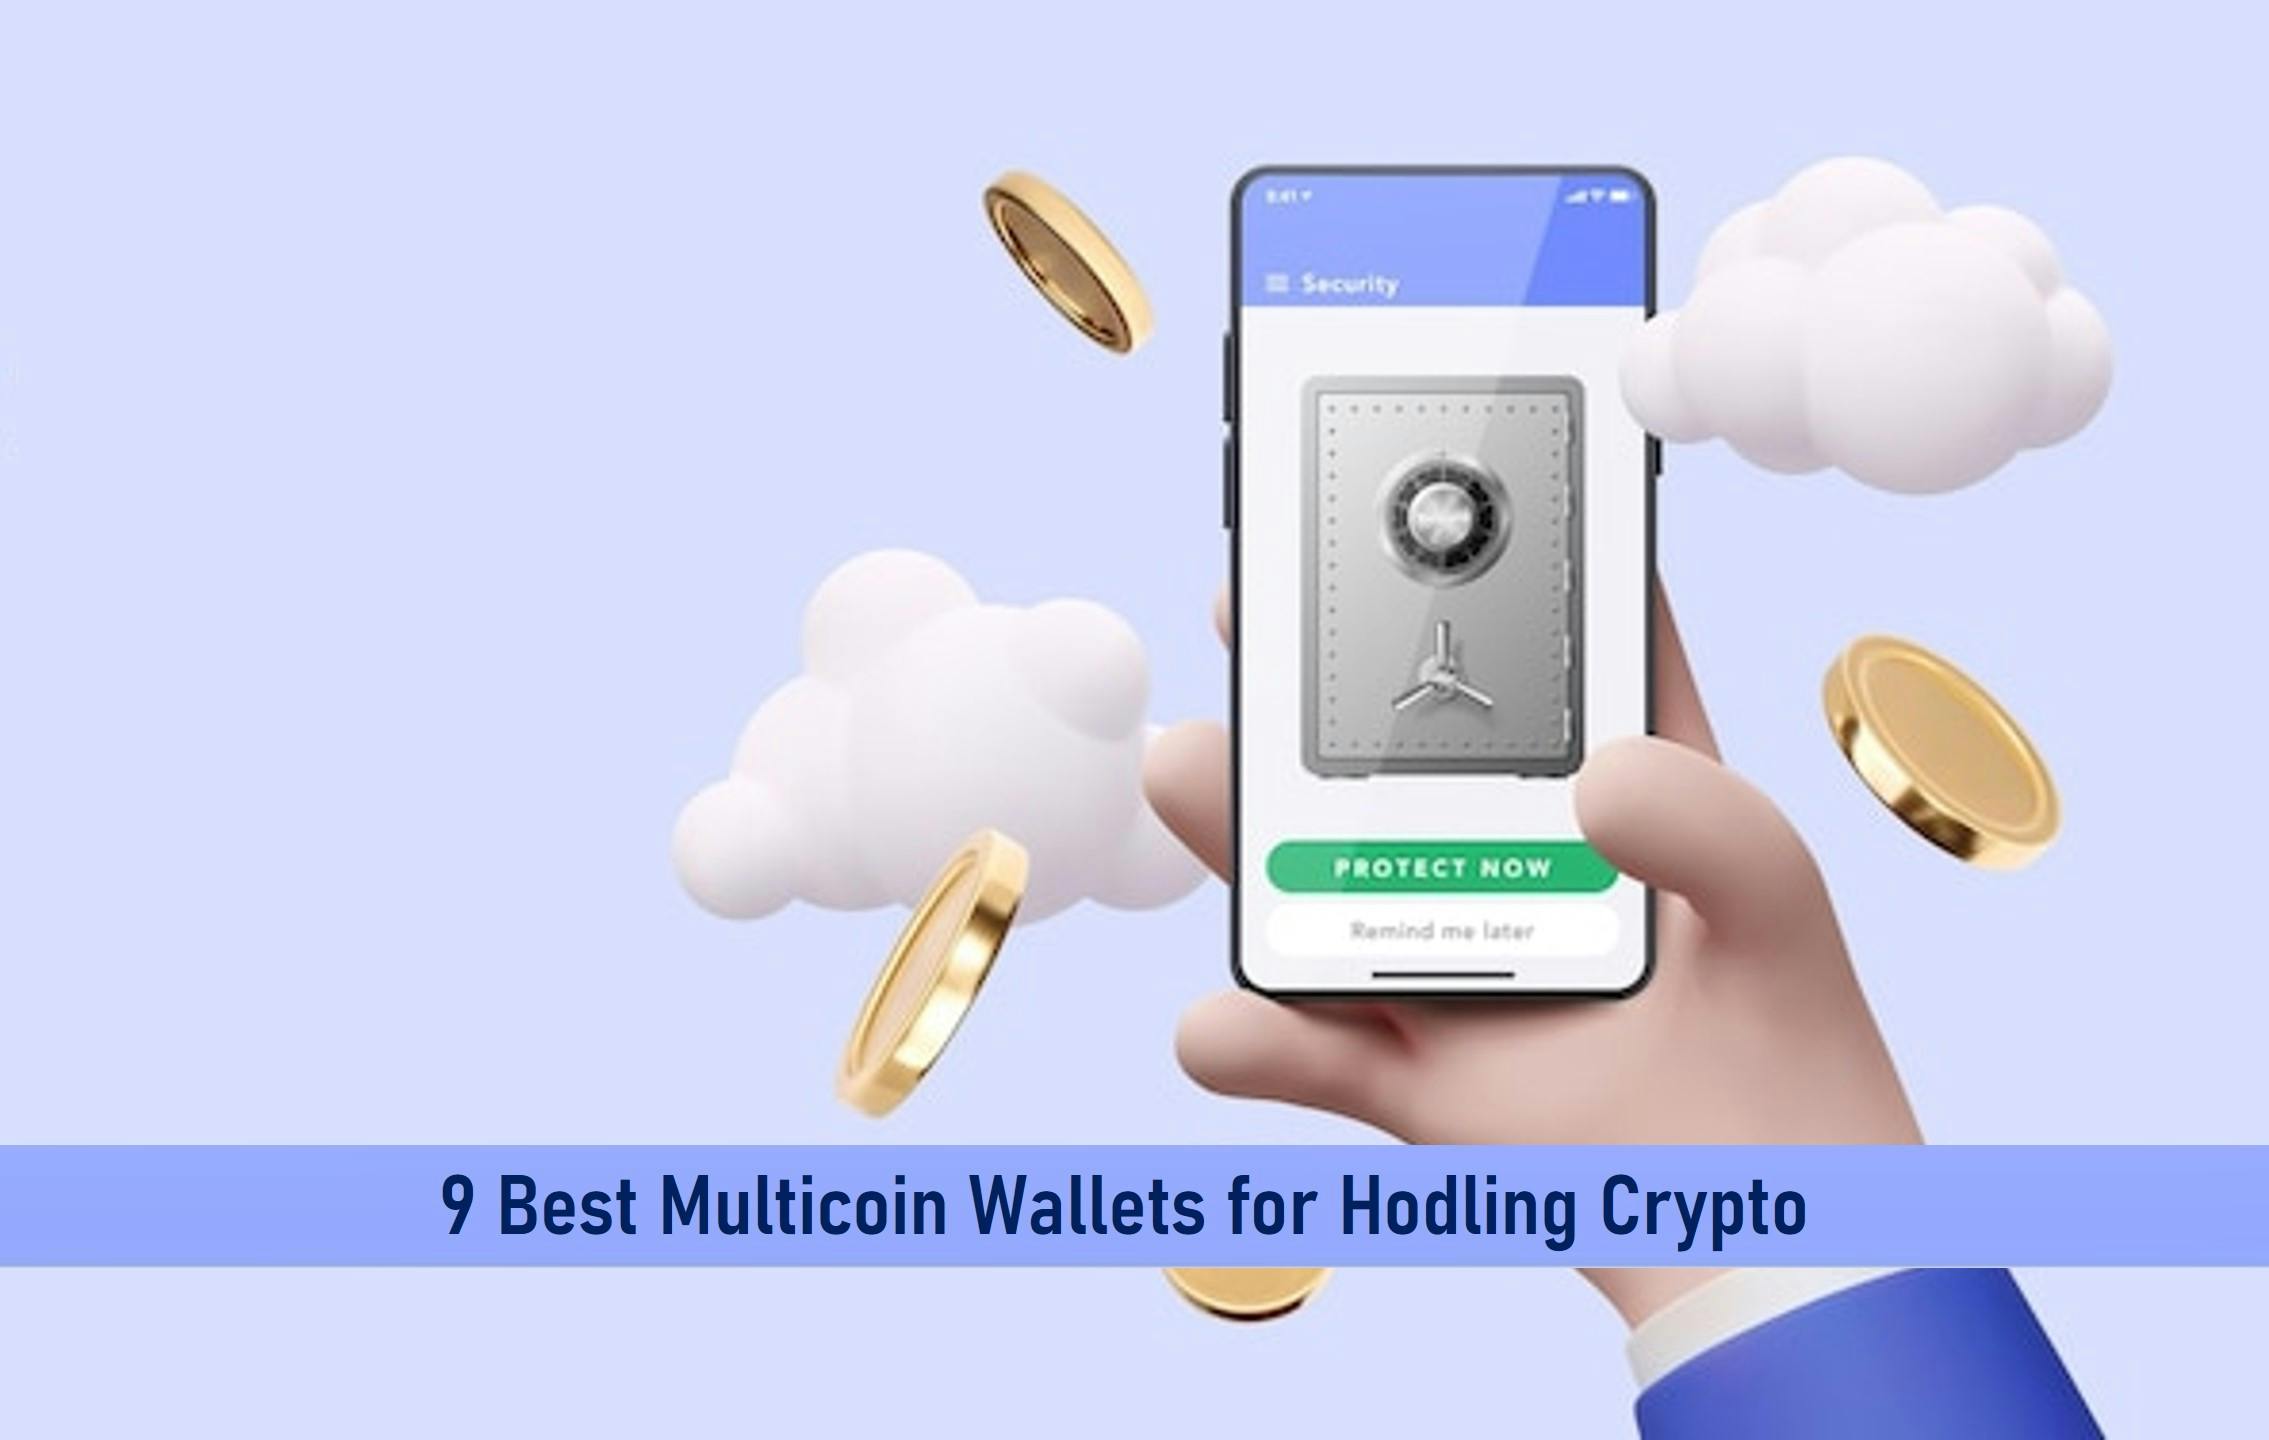 9 Best Multicoin Wallets for Hodling Crypto